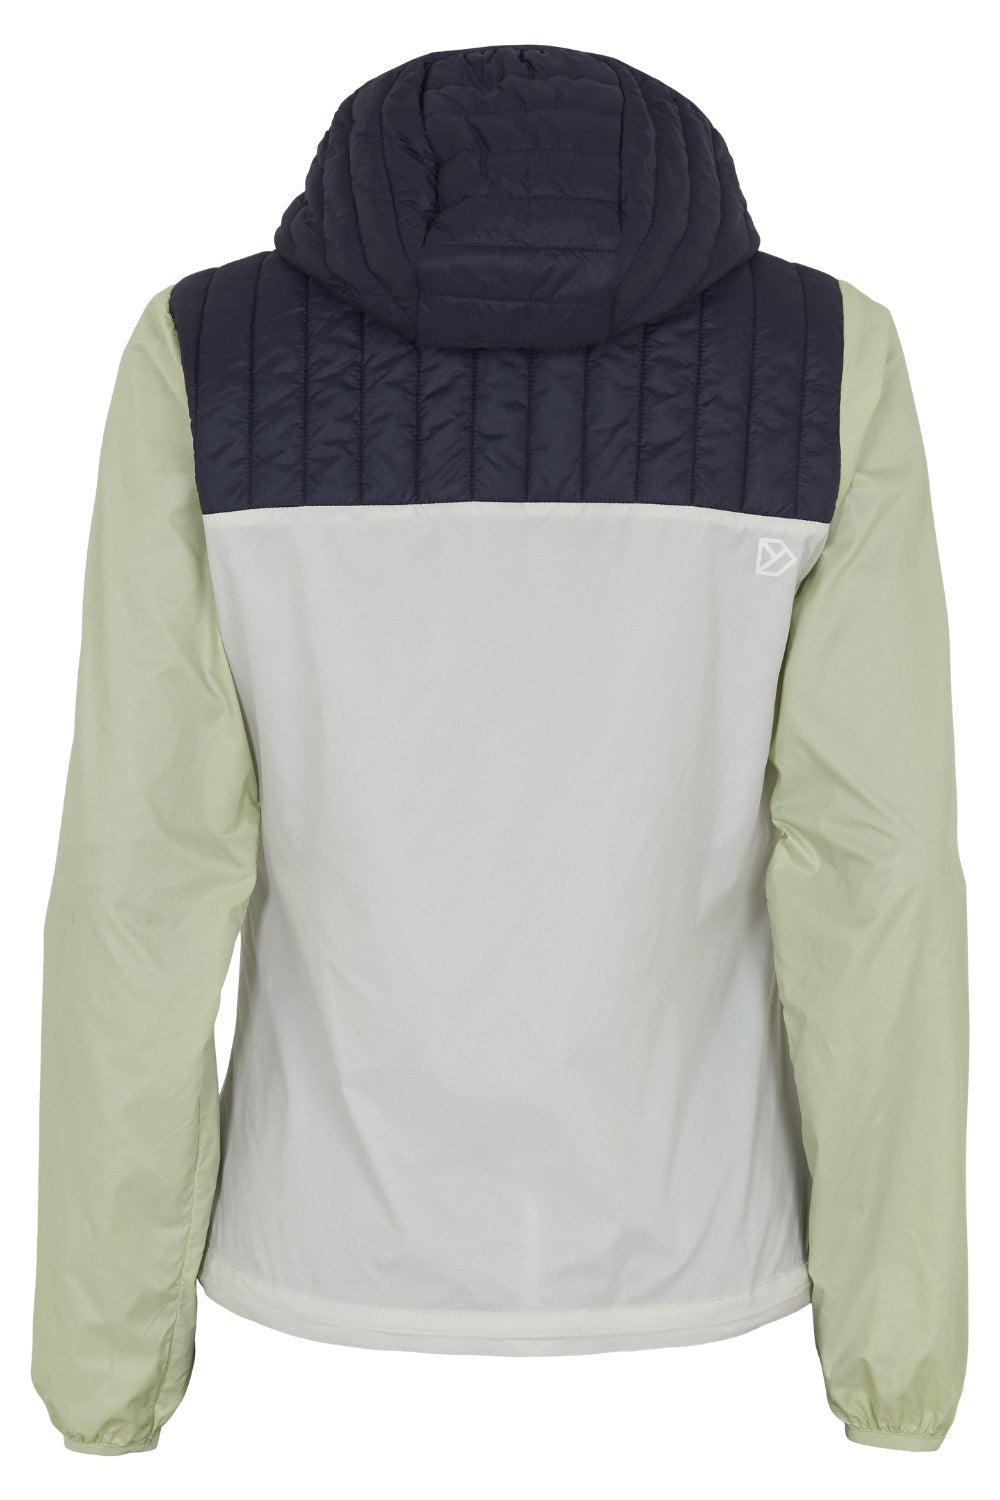 Didriksons Maj Womens Jacket 2 in Navy Green and White 